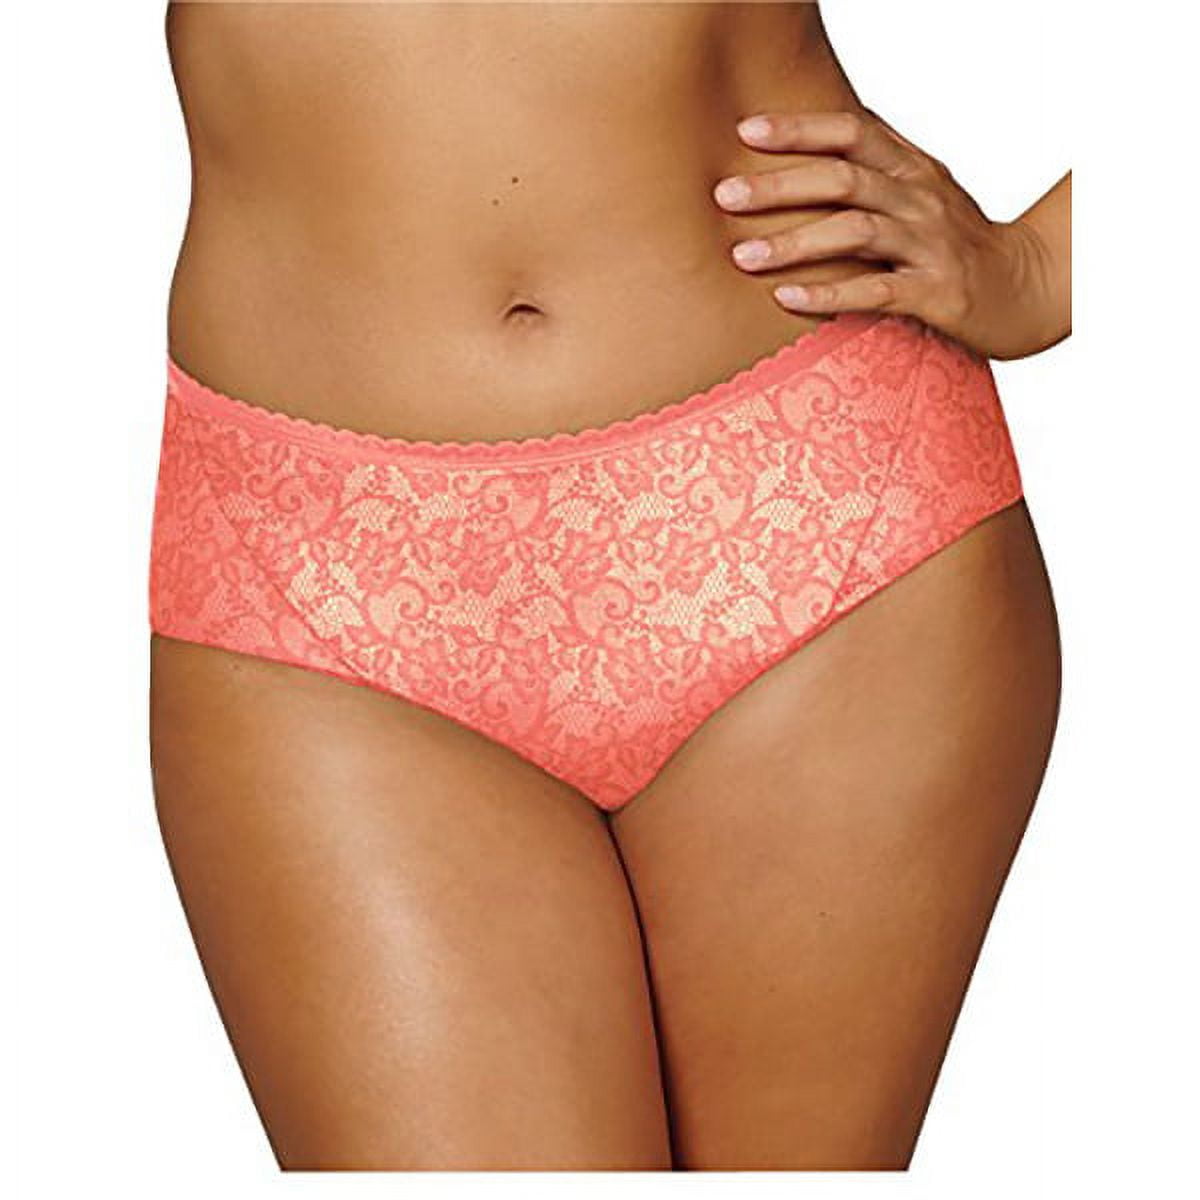 Playtex Women's Maternity V-Front Hipster Panties (Pack of 3